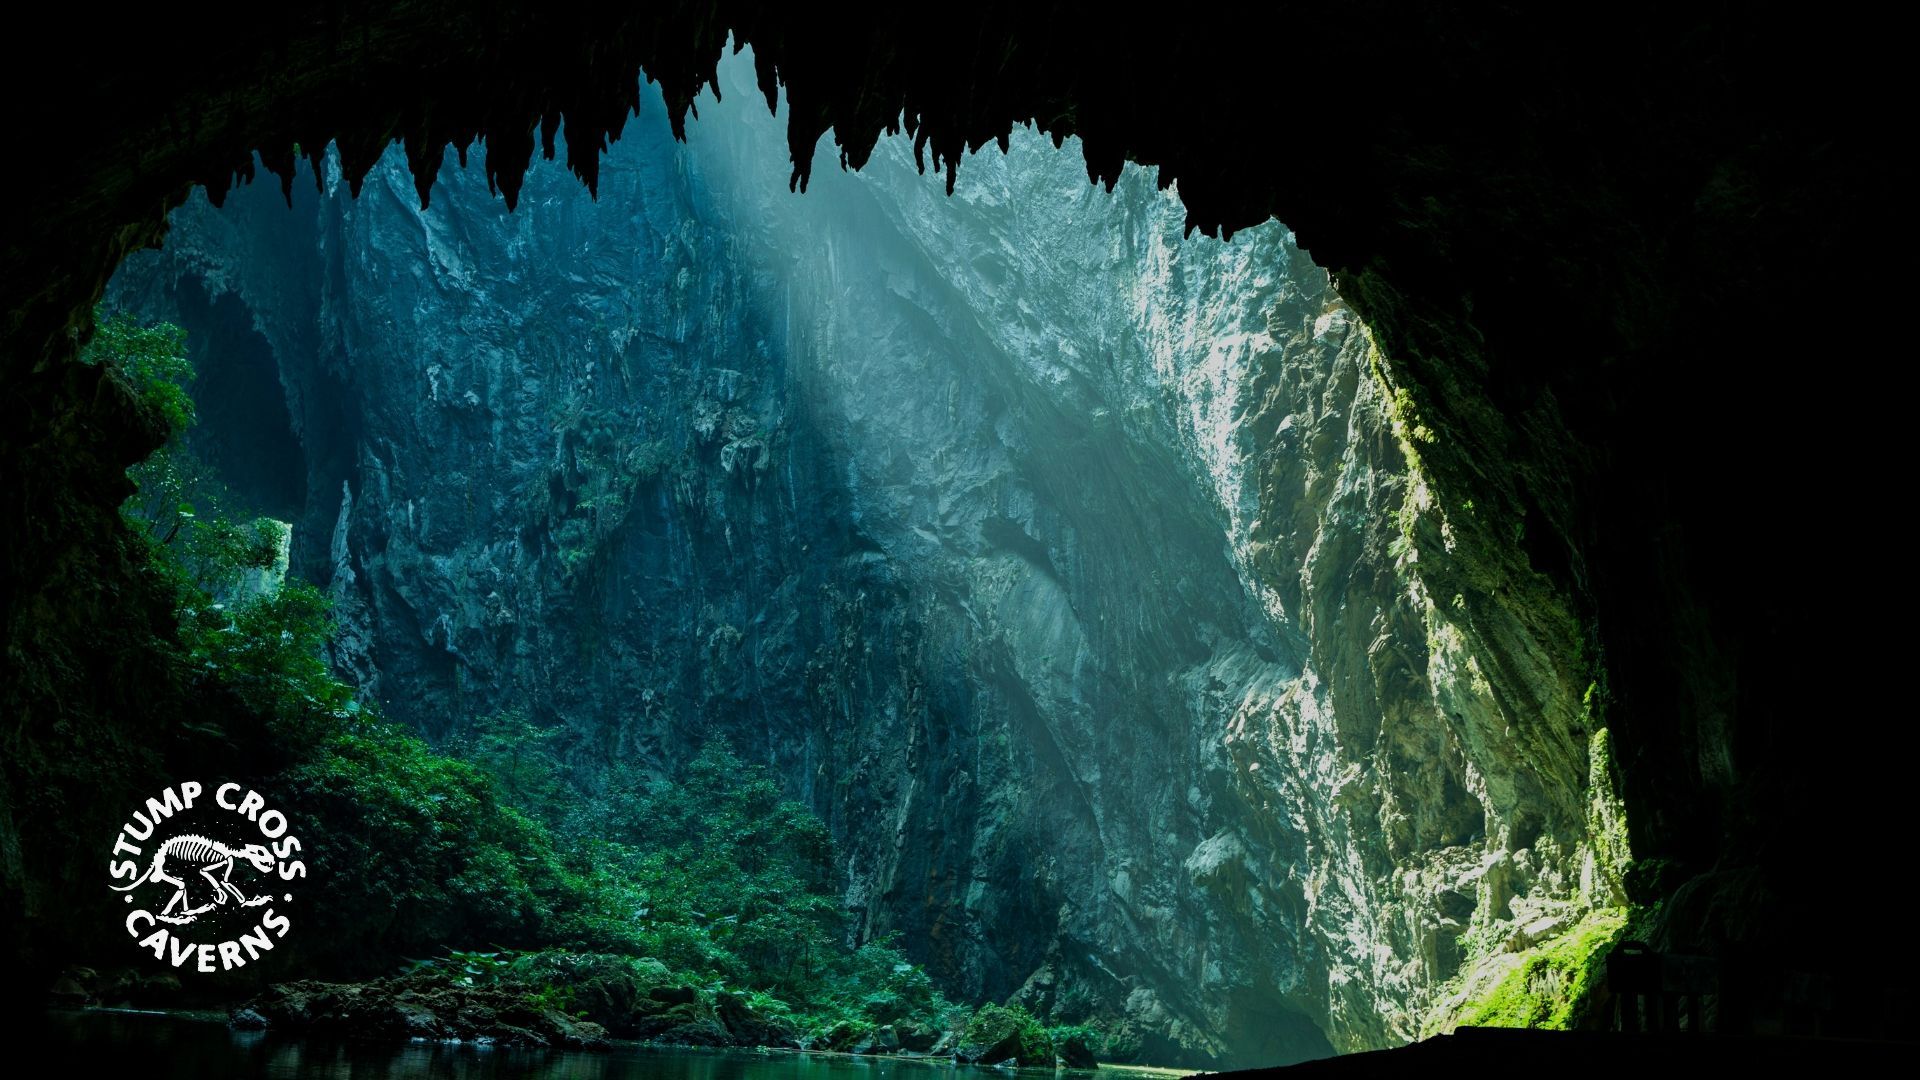 Our world is full of incredible caves. Unique and fascinating, they reveal secret worlds beneath our feet. Explore 9 of the most beautiful examples on Earth.